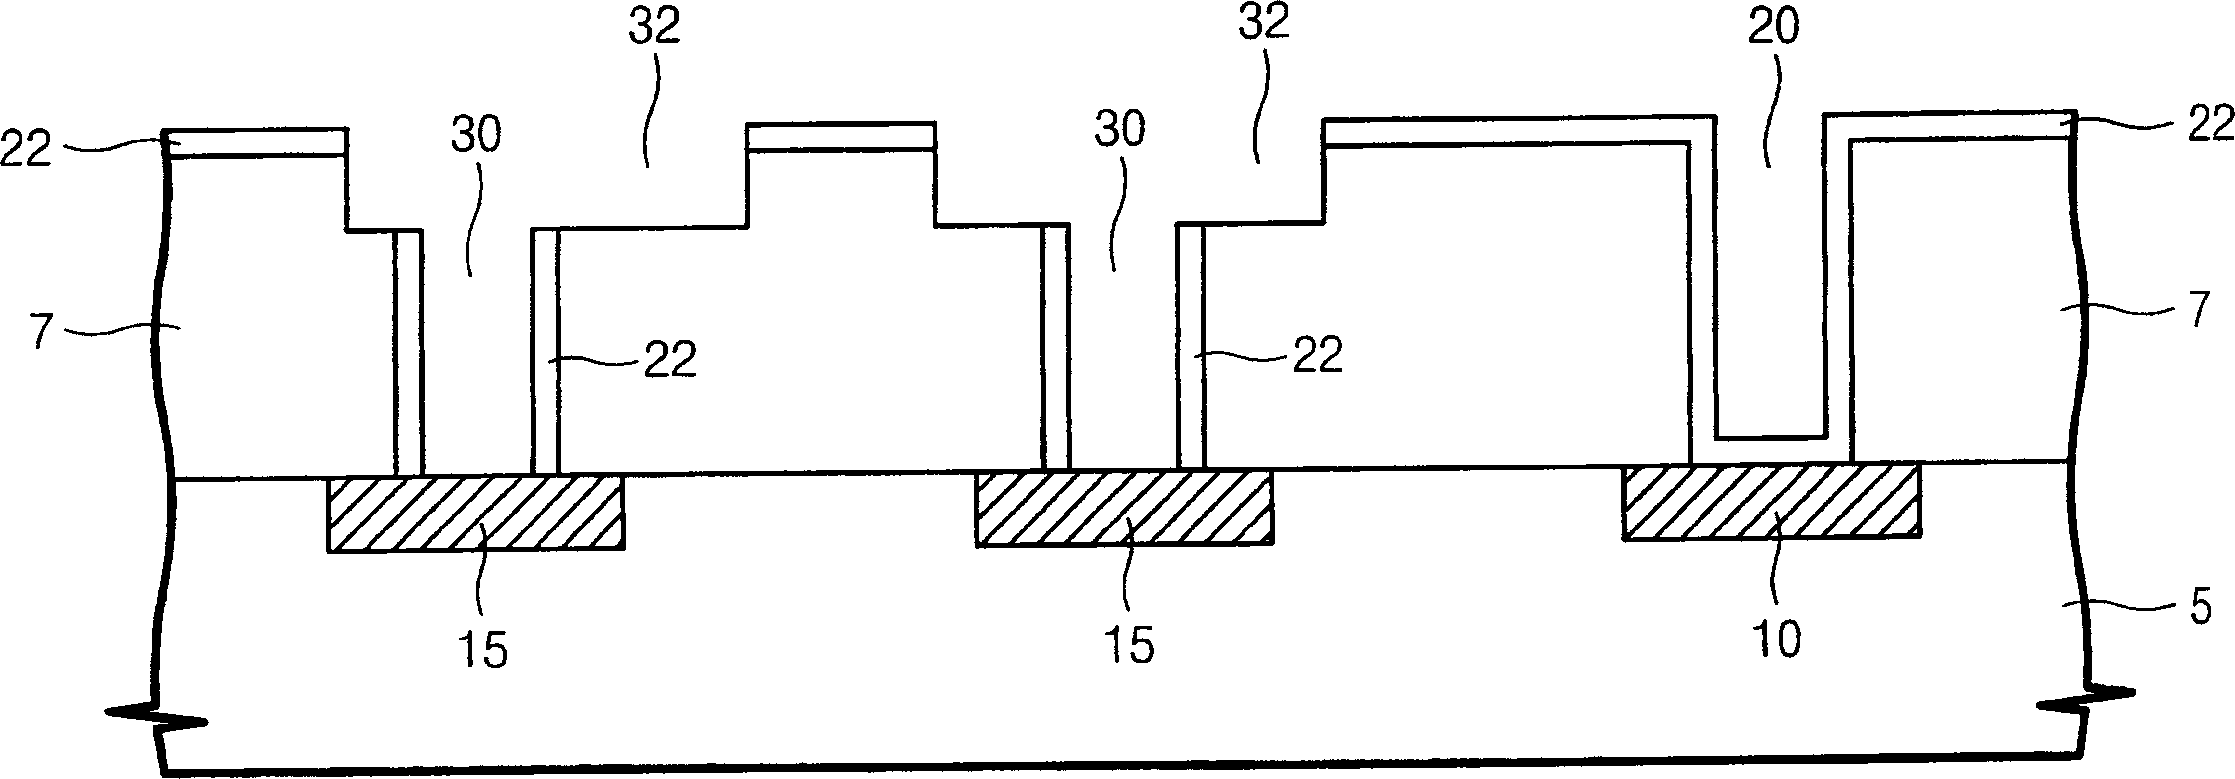 Semiconductor device with analog capacitor